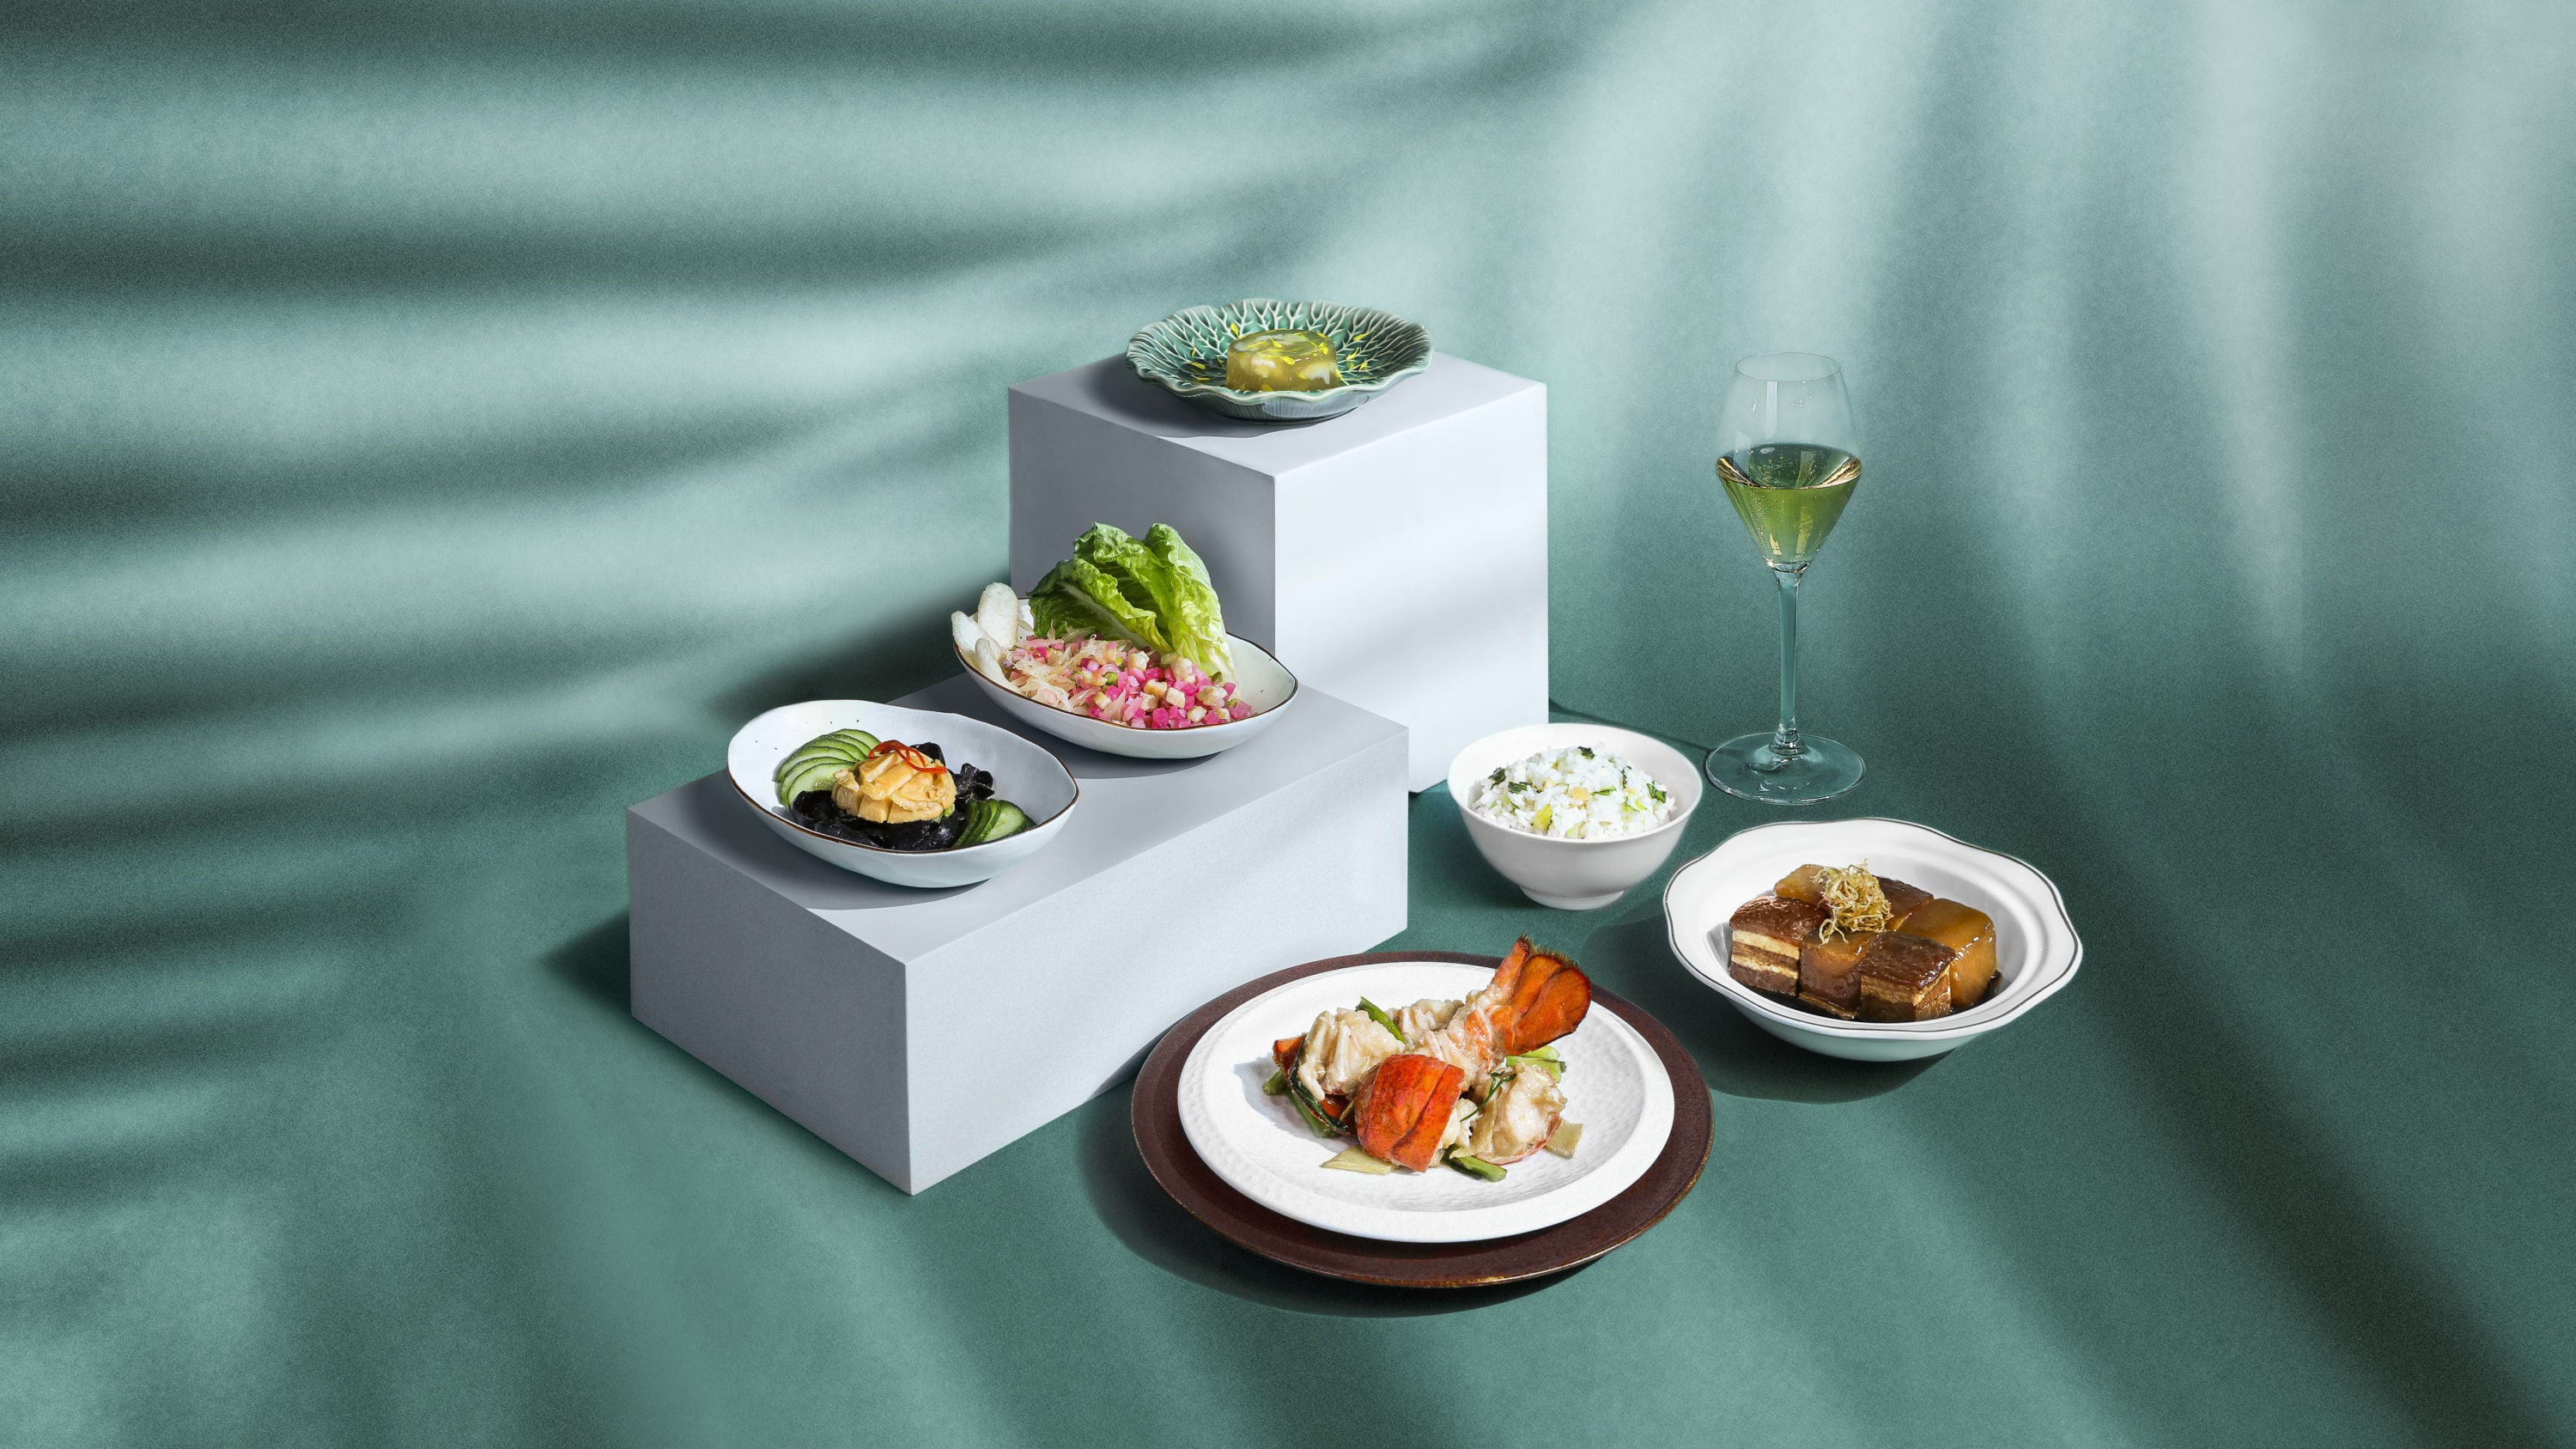 Cathay Pacific's Hong Kong Flavours first class menu offerings.